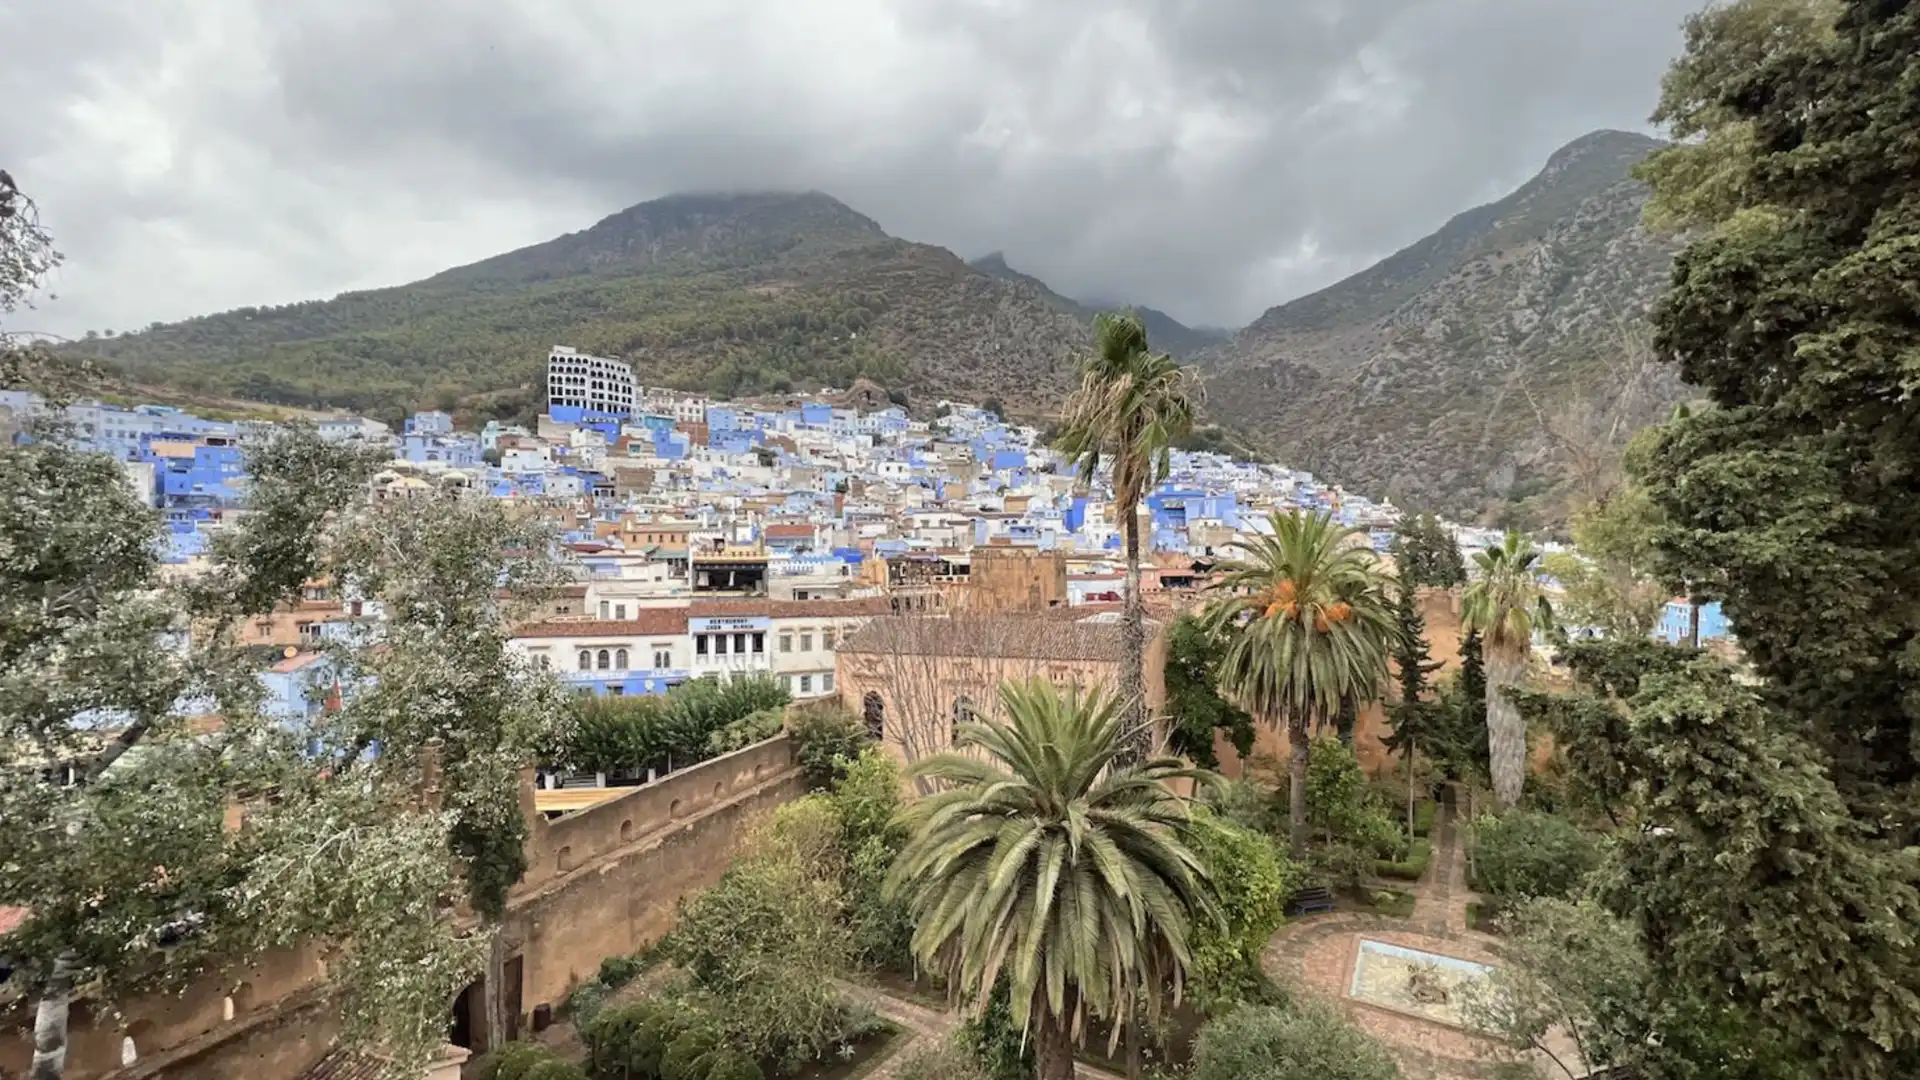 Visiting the Kasbah of Chefchaouen